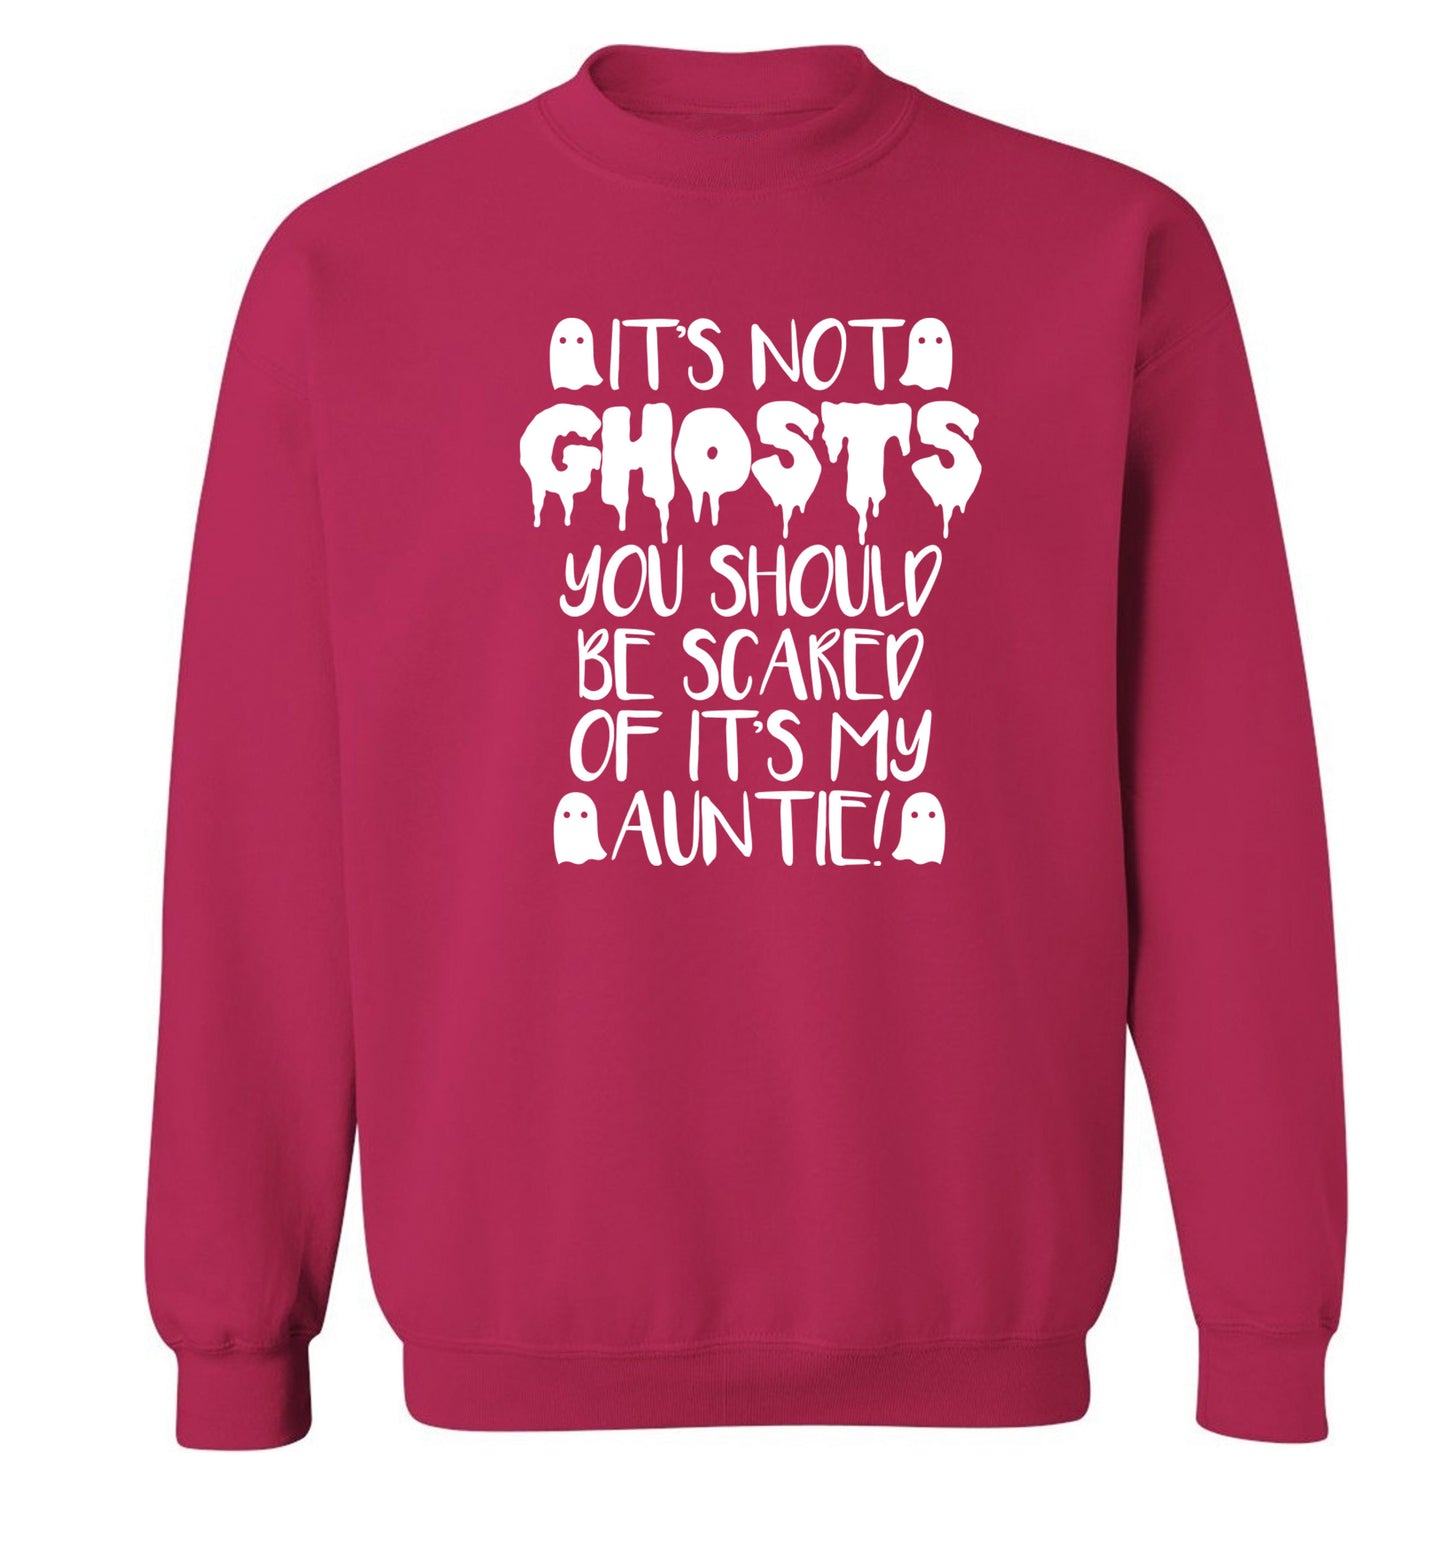 It's not ghosts you should be scared of it's my auntie! Adult's unisex pink Sweater 2XL